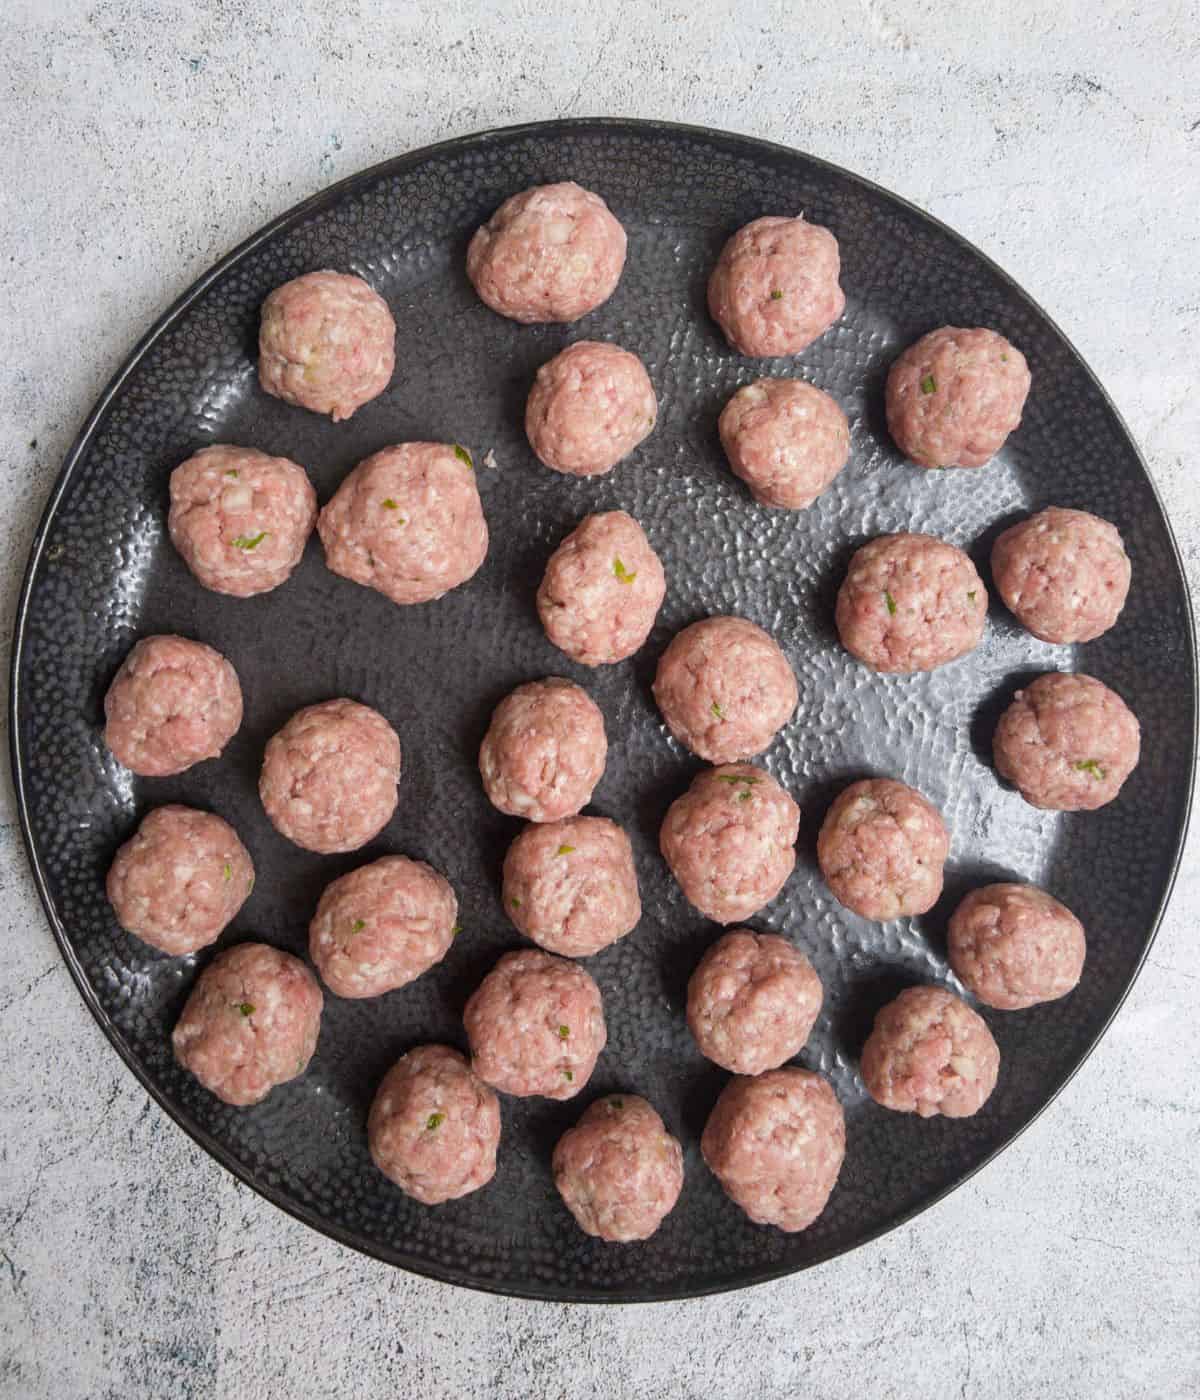 uncooked rolled meatballs on a black plate.